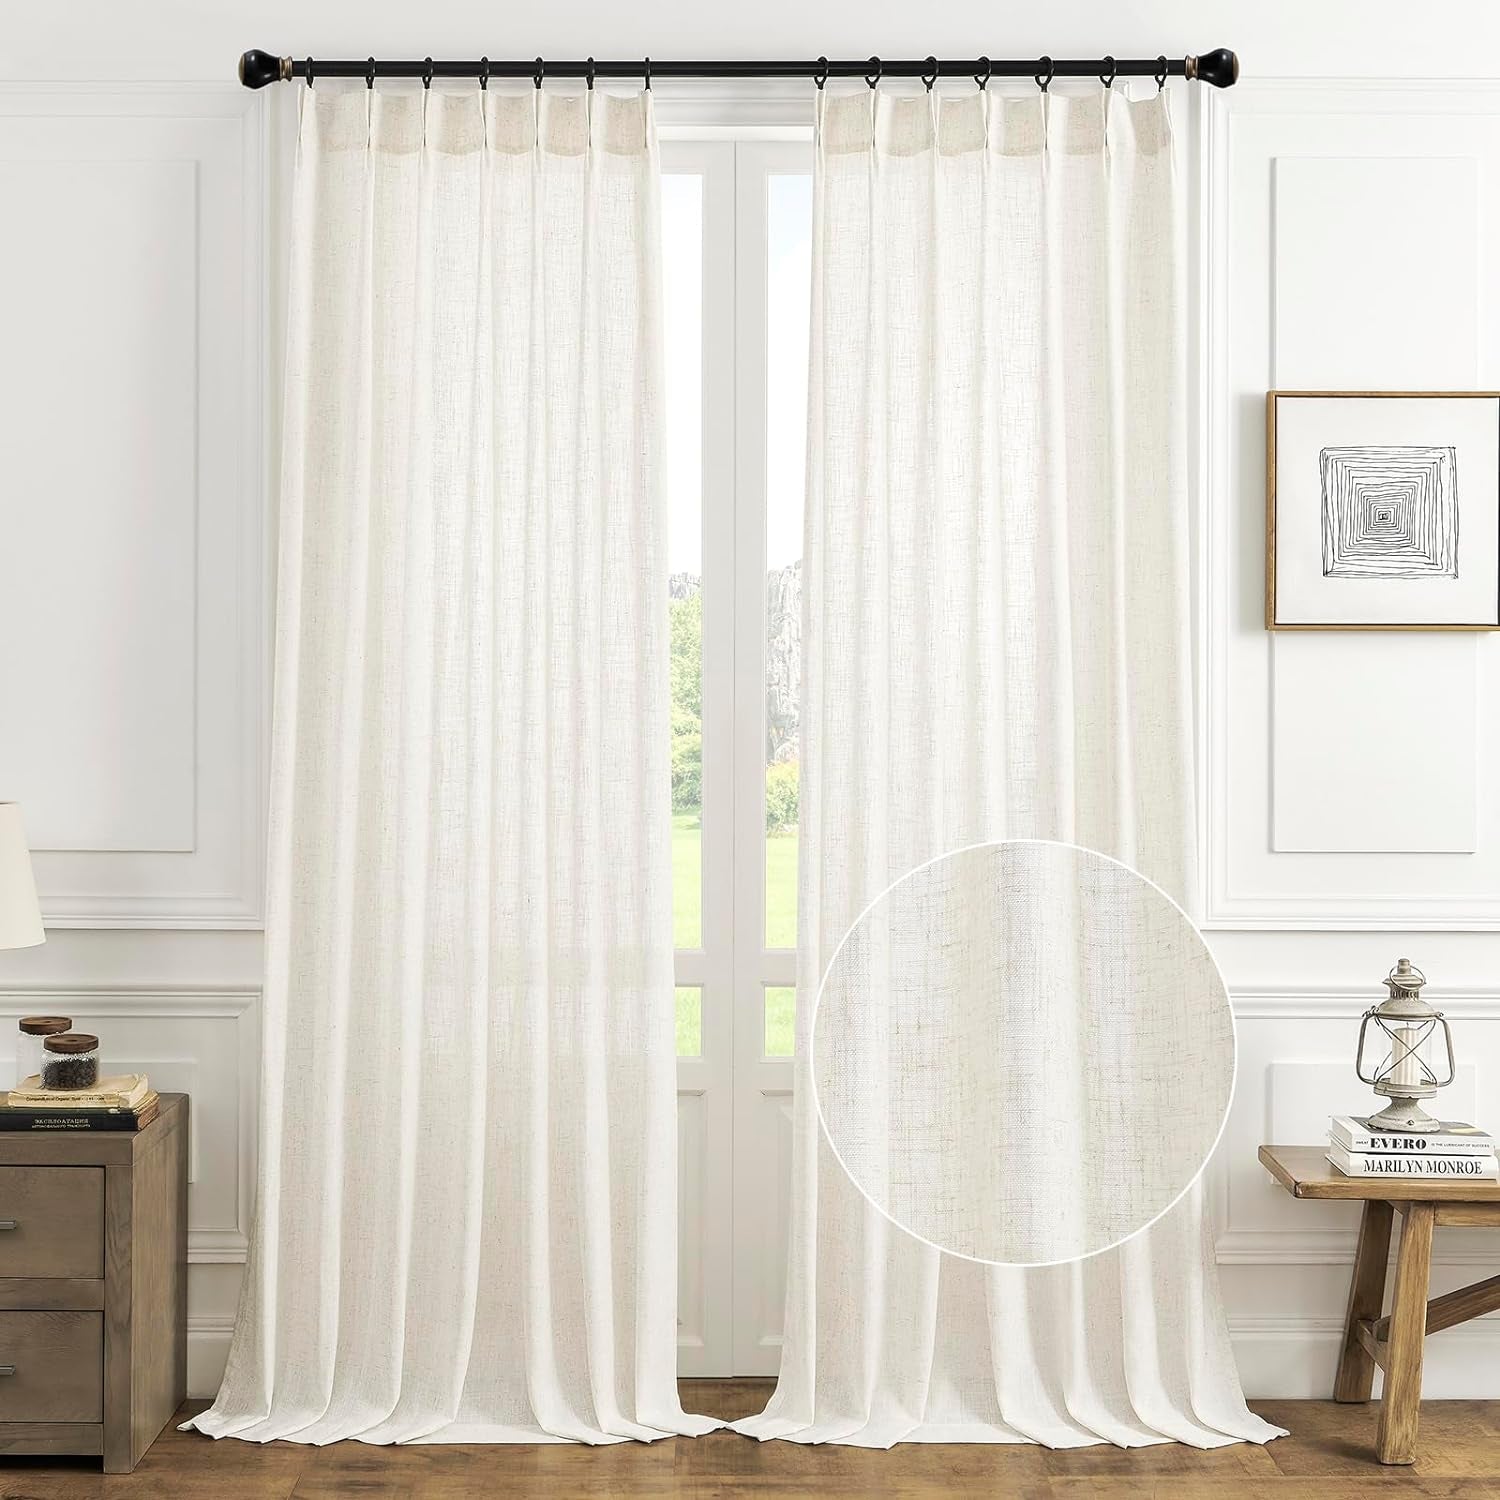 Maison Colette Pinch Pleat Natural Linen Sheer Curtain 95 Inches Long,Back Tab Stripe Transparent Voile Window Drapes for Bedroom/Living Room, 2 Panels,42" Width,Linen  Maison Colette Home Linen 42"W X 108"L 